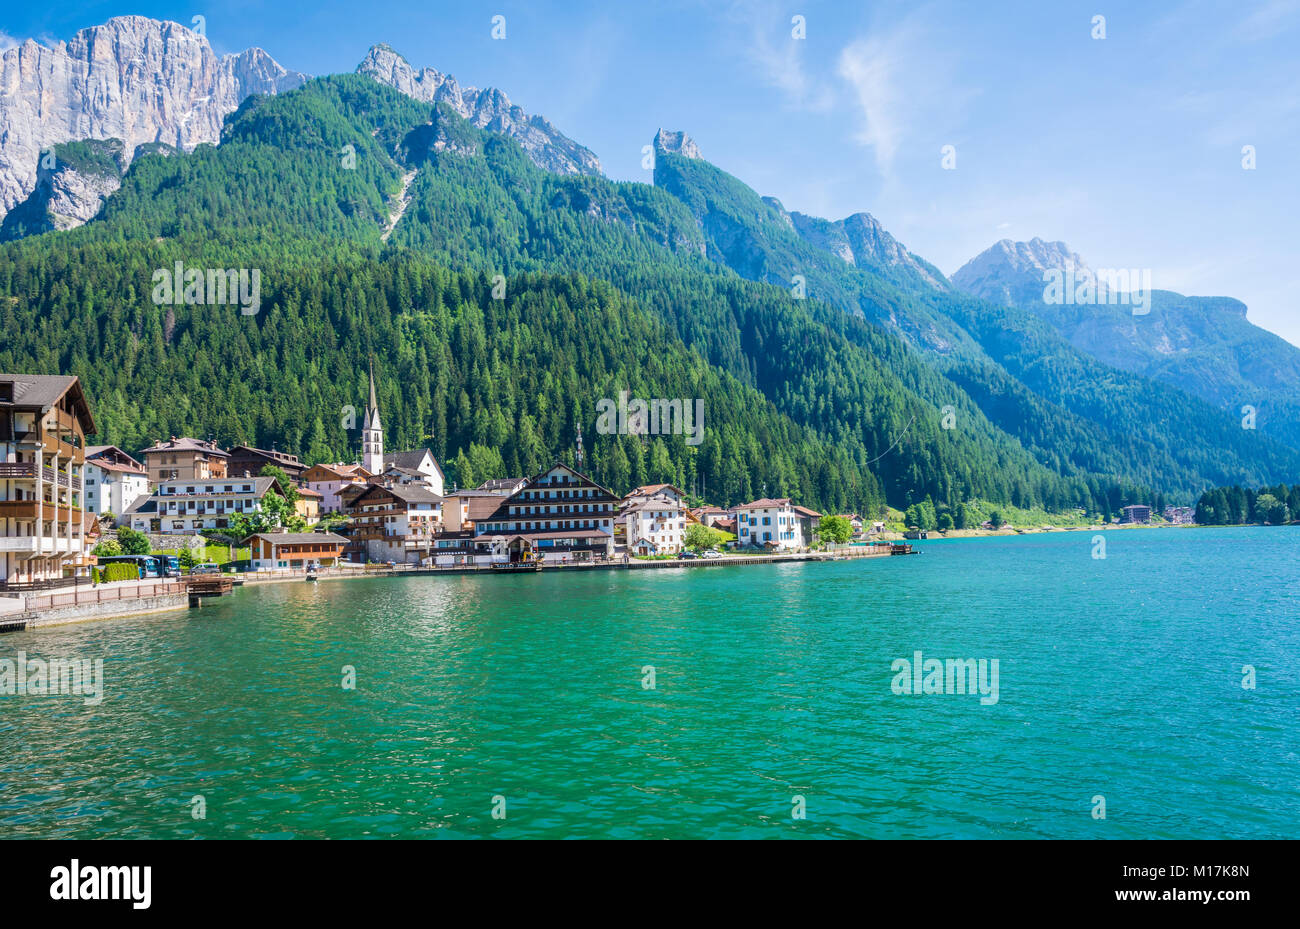 Alleghe, Belluno,italy: a charming mountain village located in a unique natural setting overlooking its fascinating lake Stock Photo